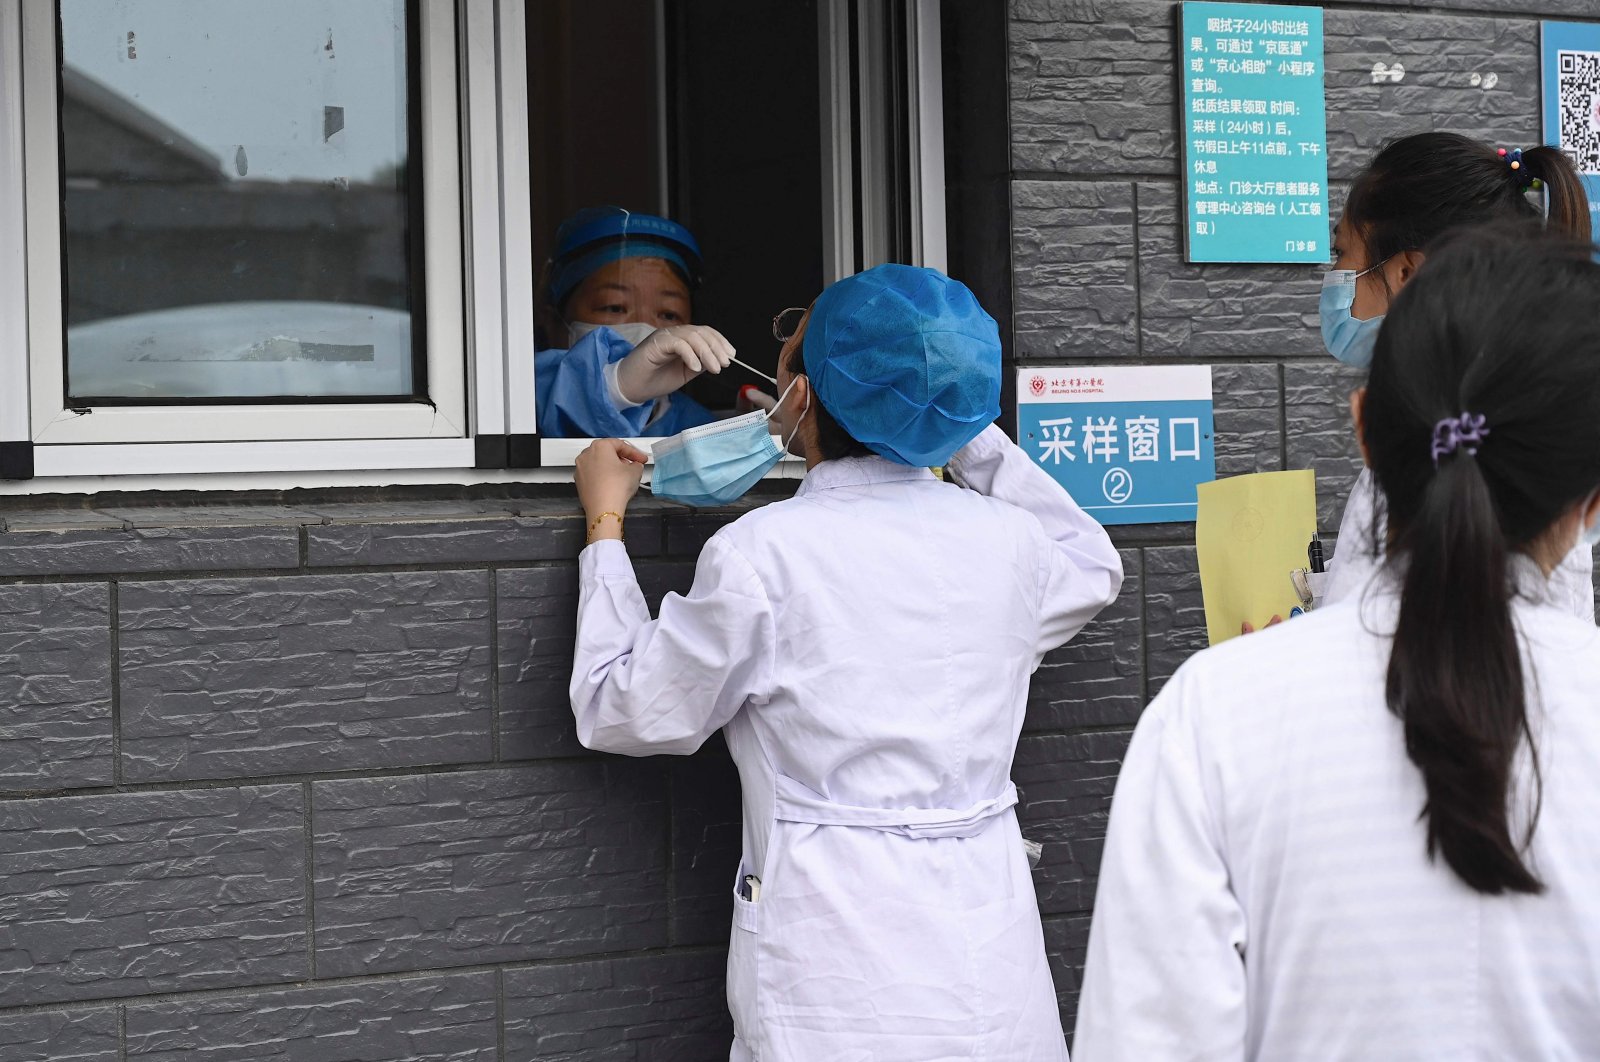 A health worker takes a swab sample from a medical worker to be tested for COVID-19 coronavirus at a hospital in Beijing, China, Aug. 3, 2021. (AFP Photo)